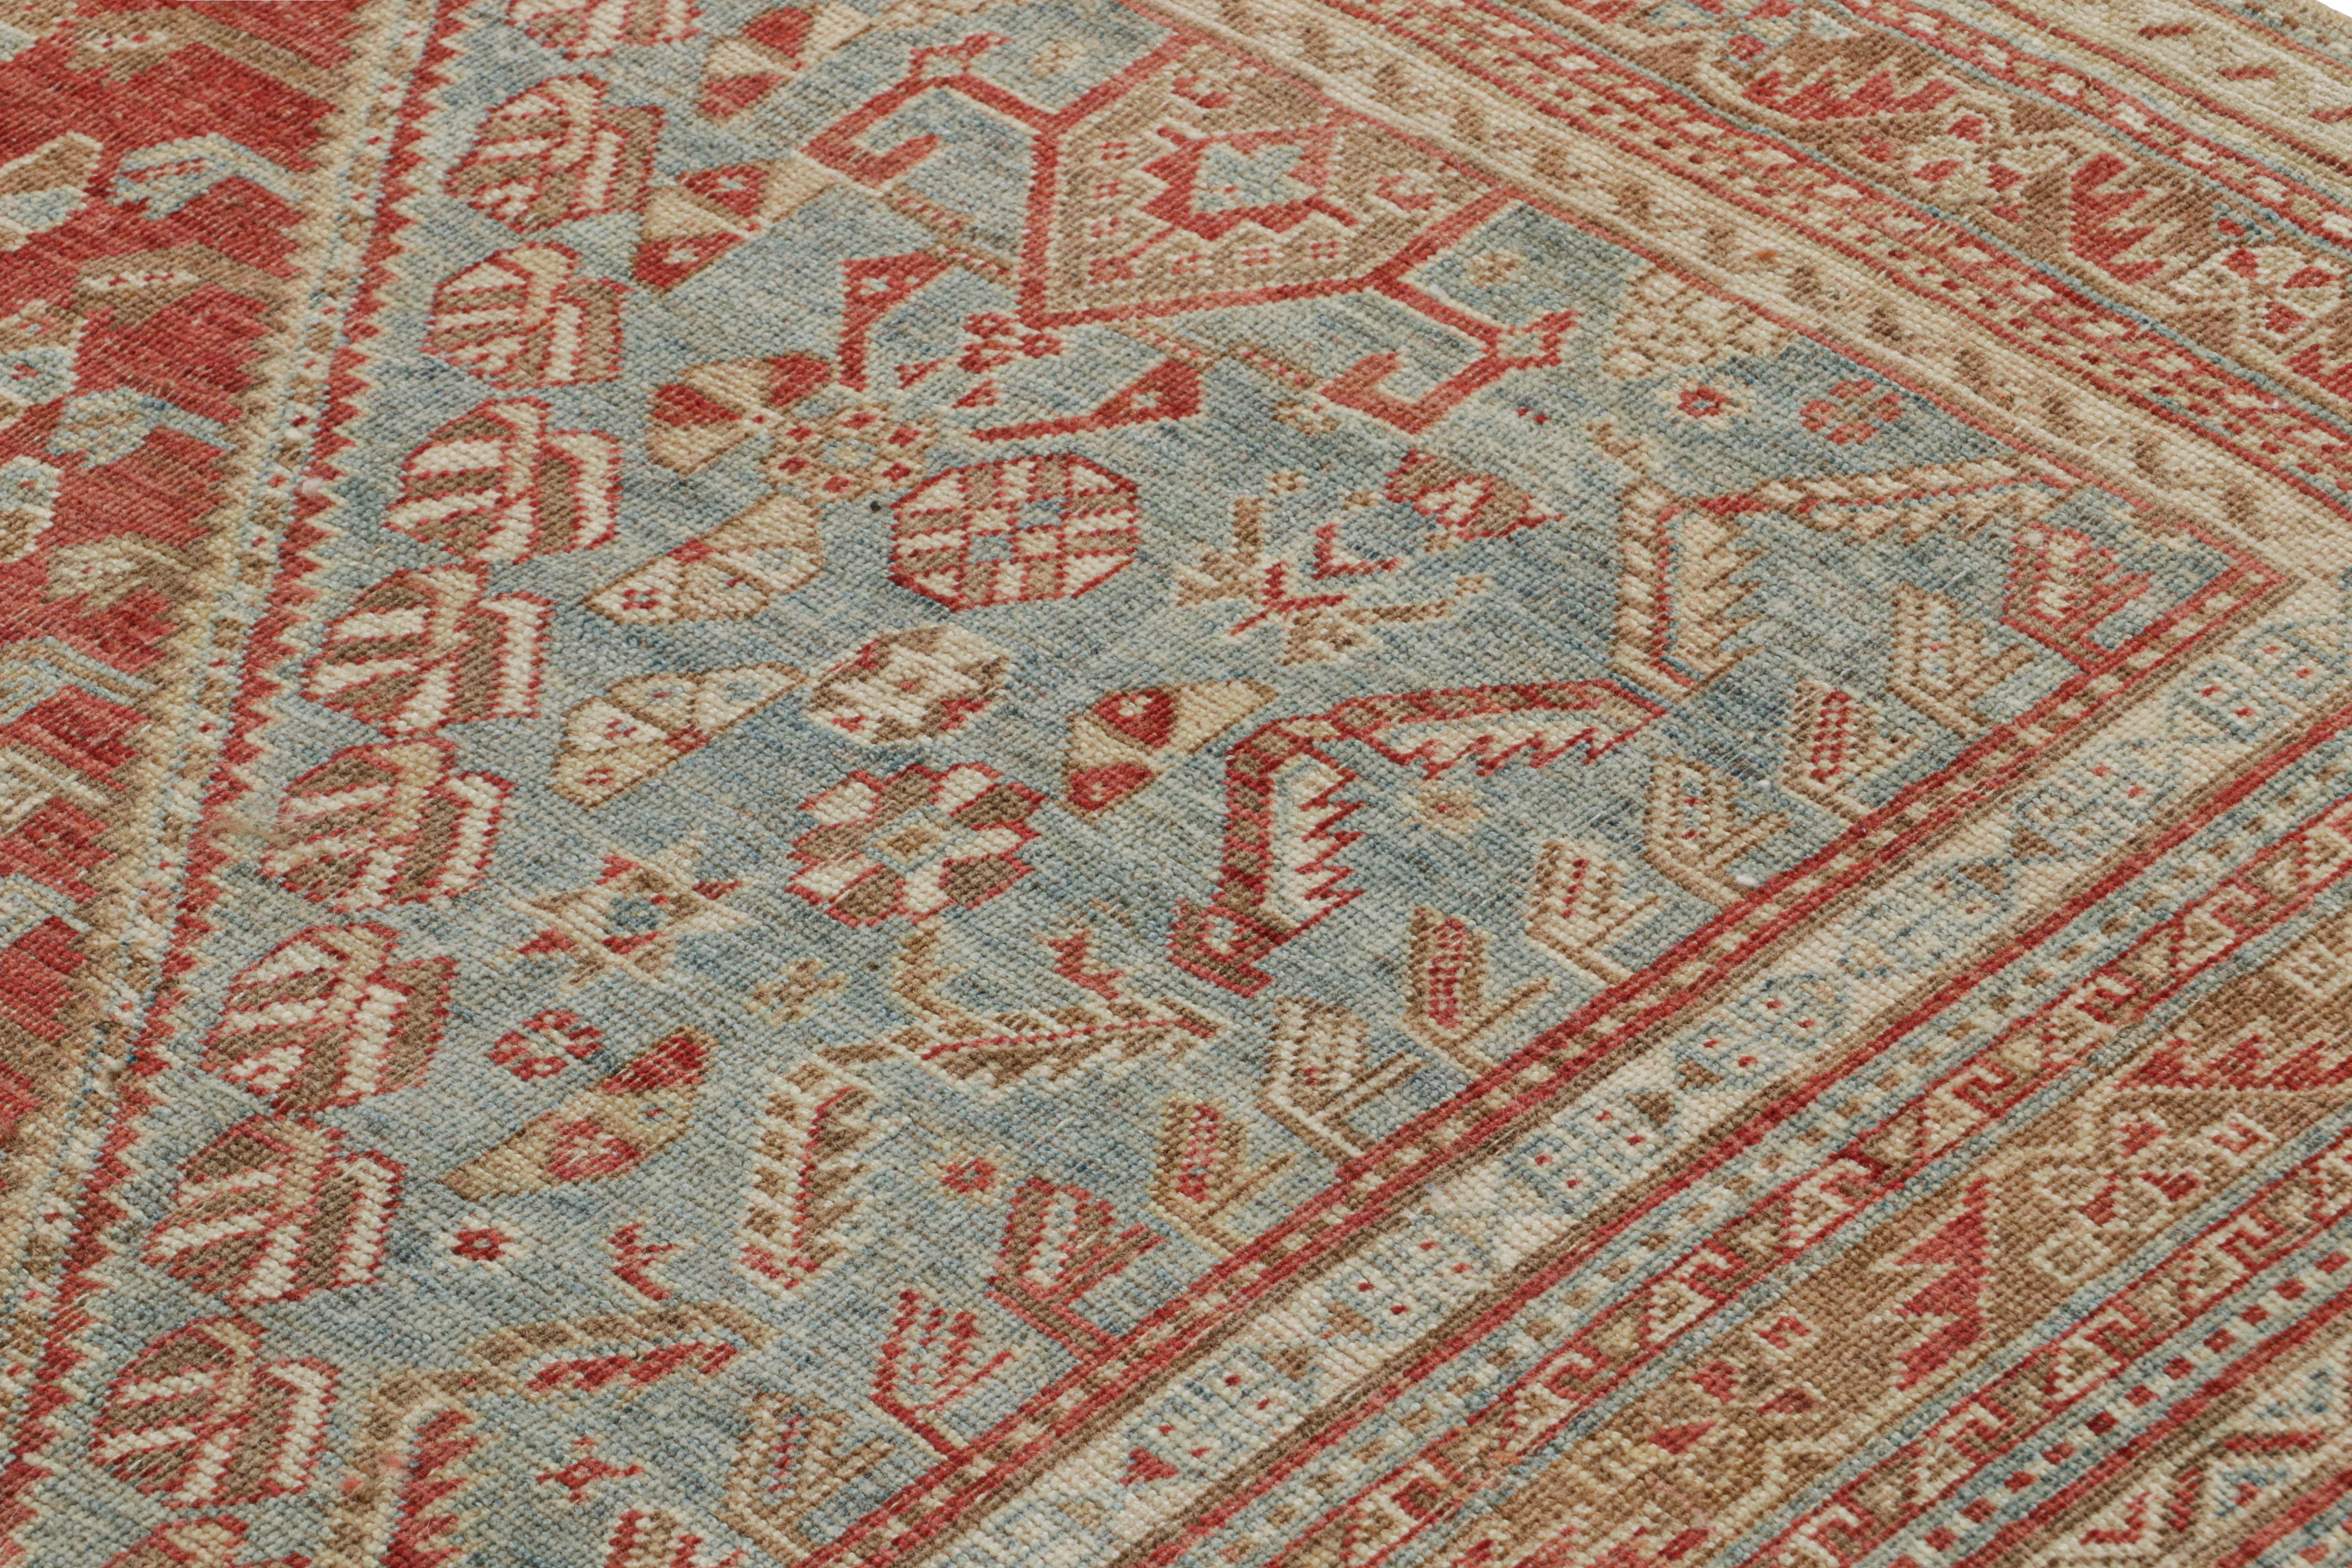 Vintage Ersari Rug in Red with Blue and Beige-Brown Patterns, from Rug & Kilim In Good Condition For Sale In Long Island City, NY